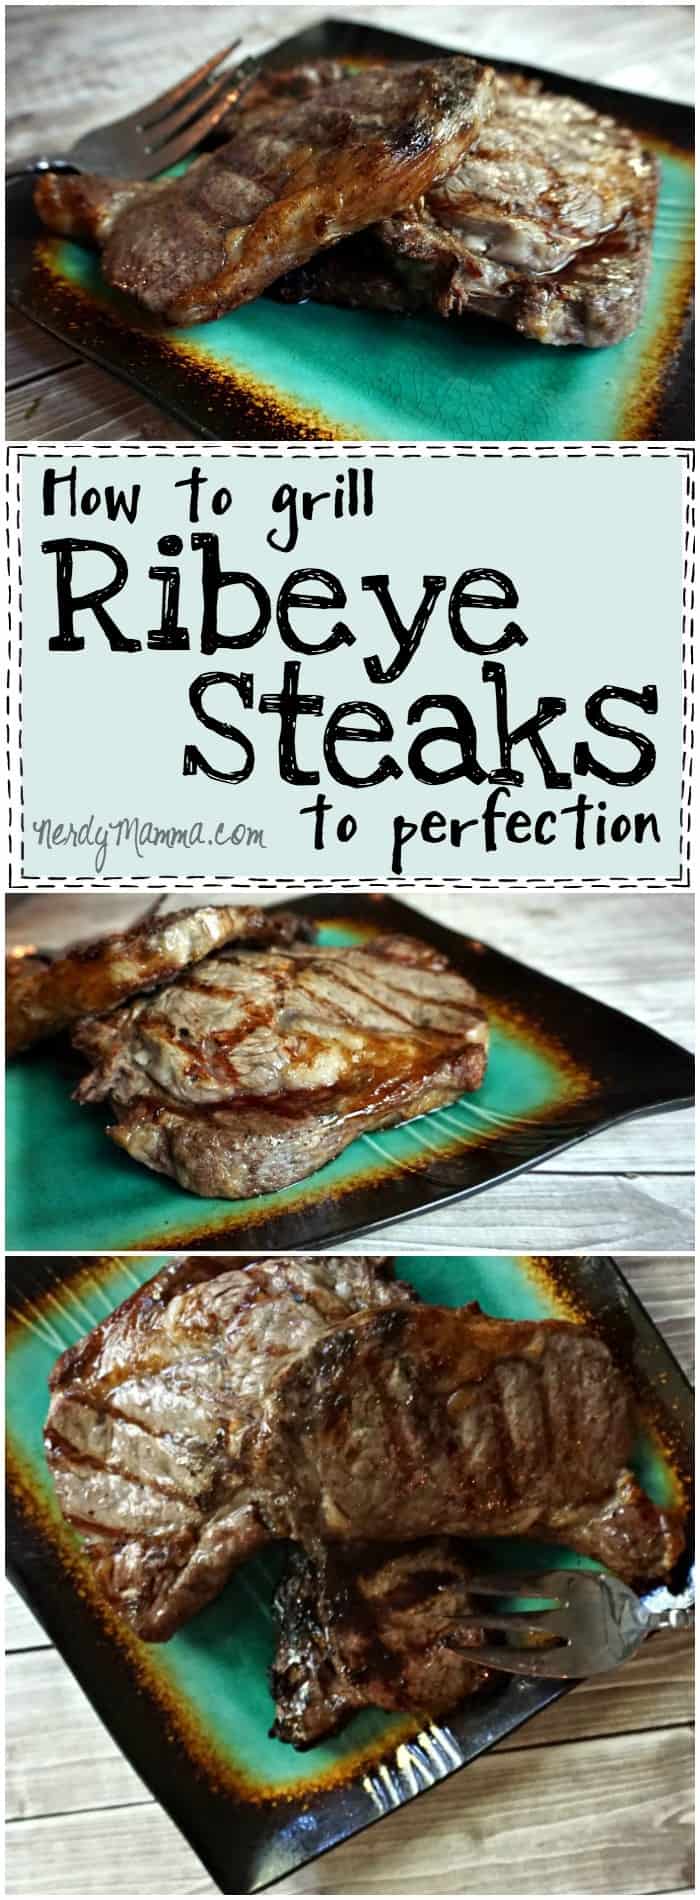 I had no idea it was so easy to grill steaks and have them turn out so well. I can't wait to try this over the weekend! Love it!